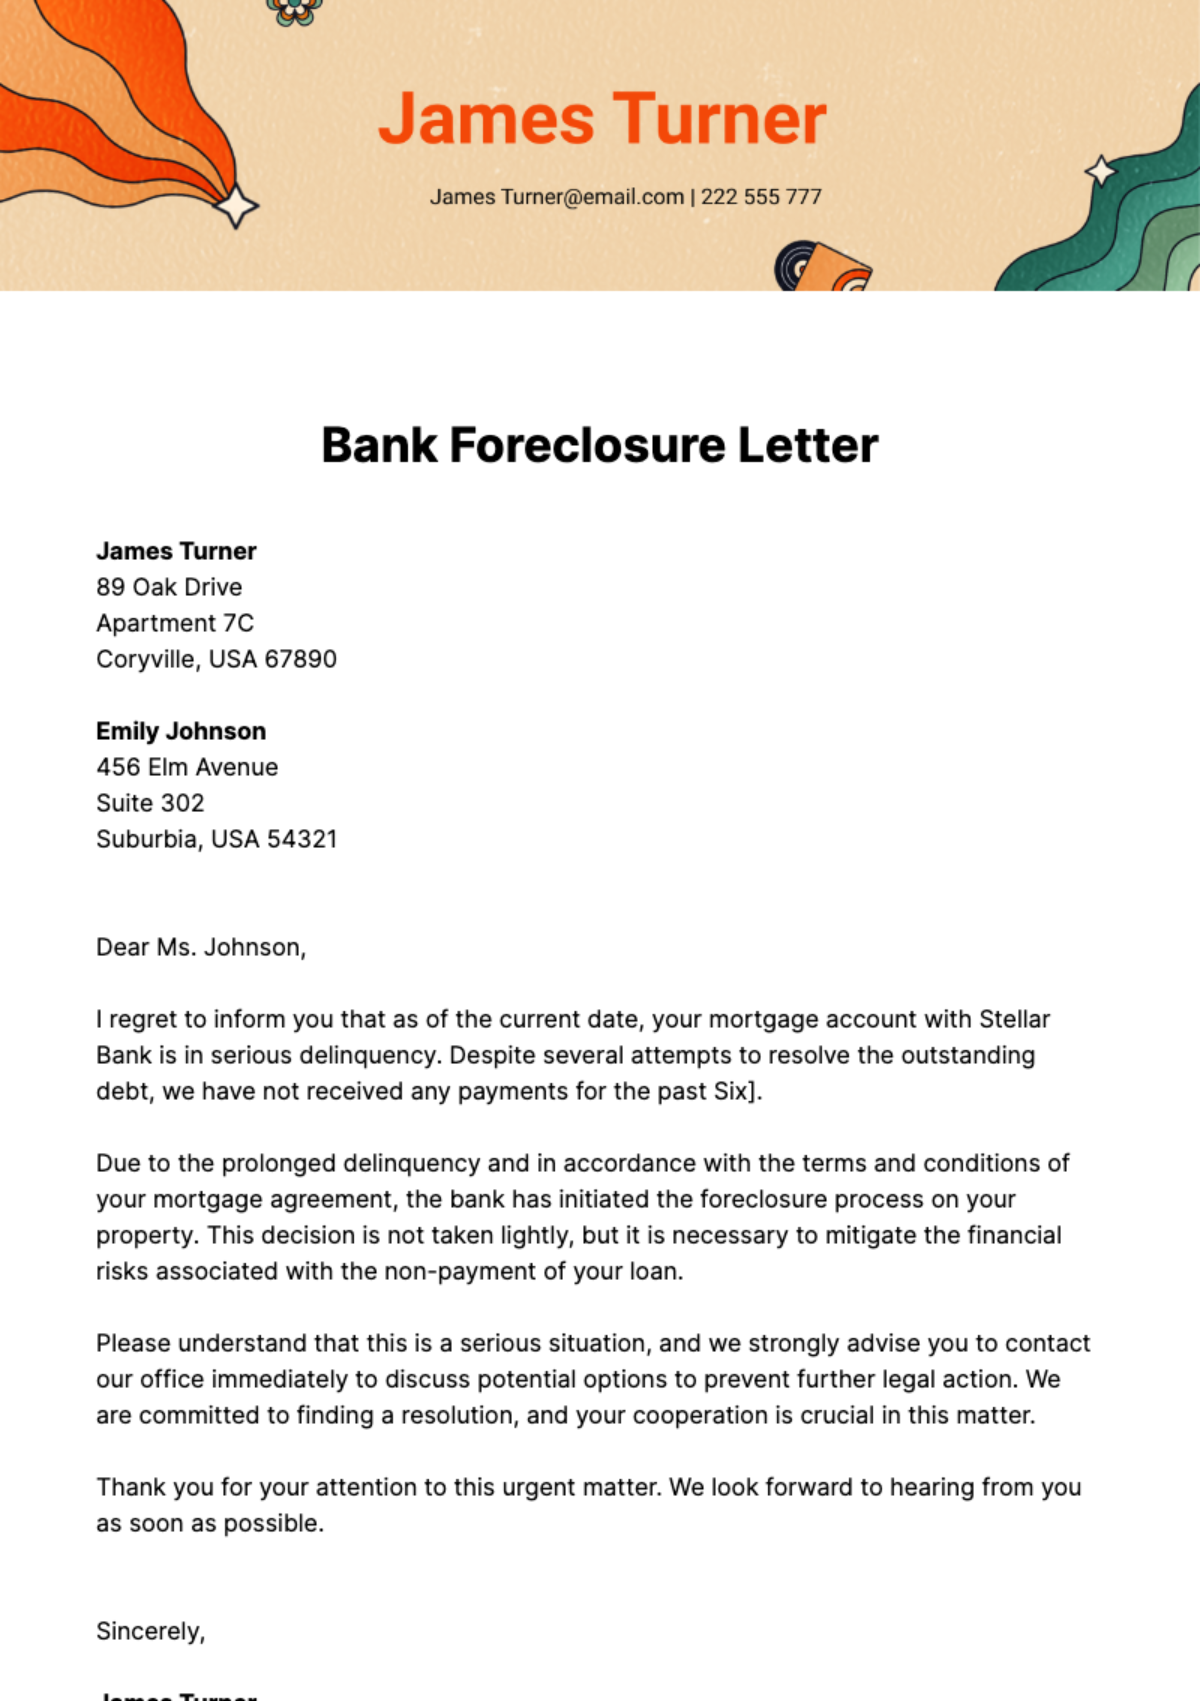 Bank Foreclosure Letter Template